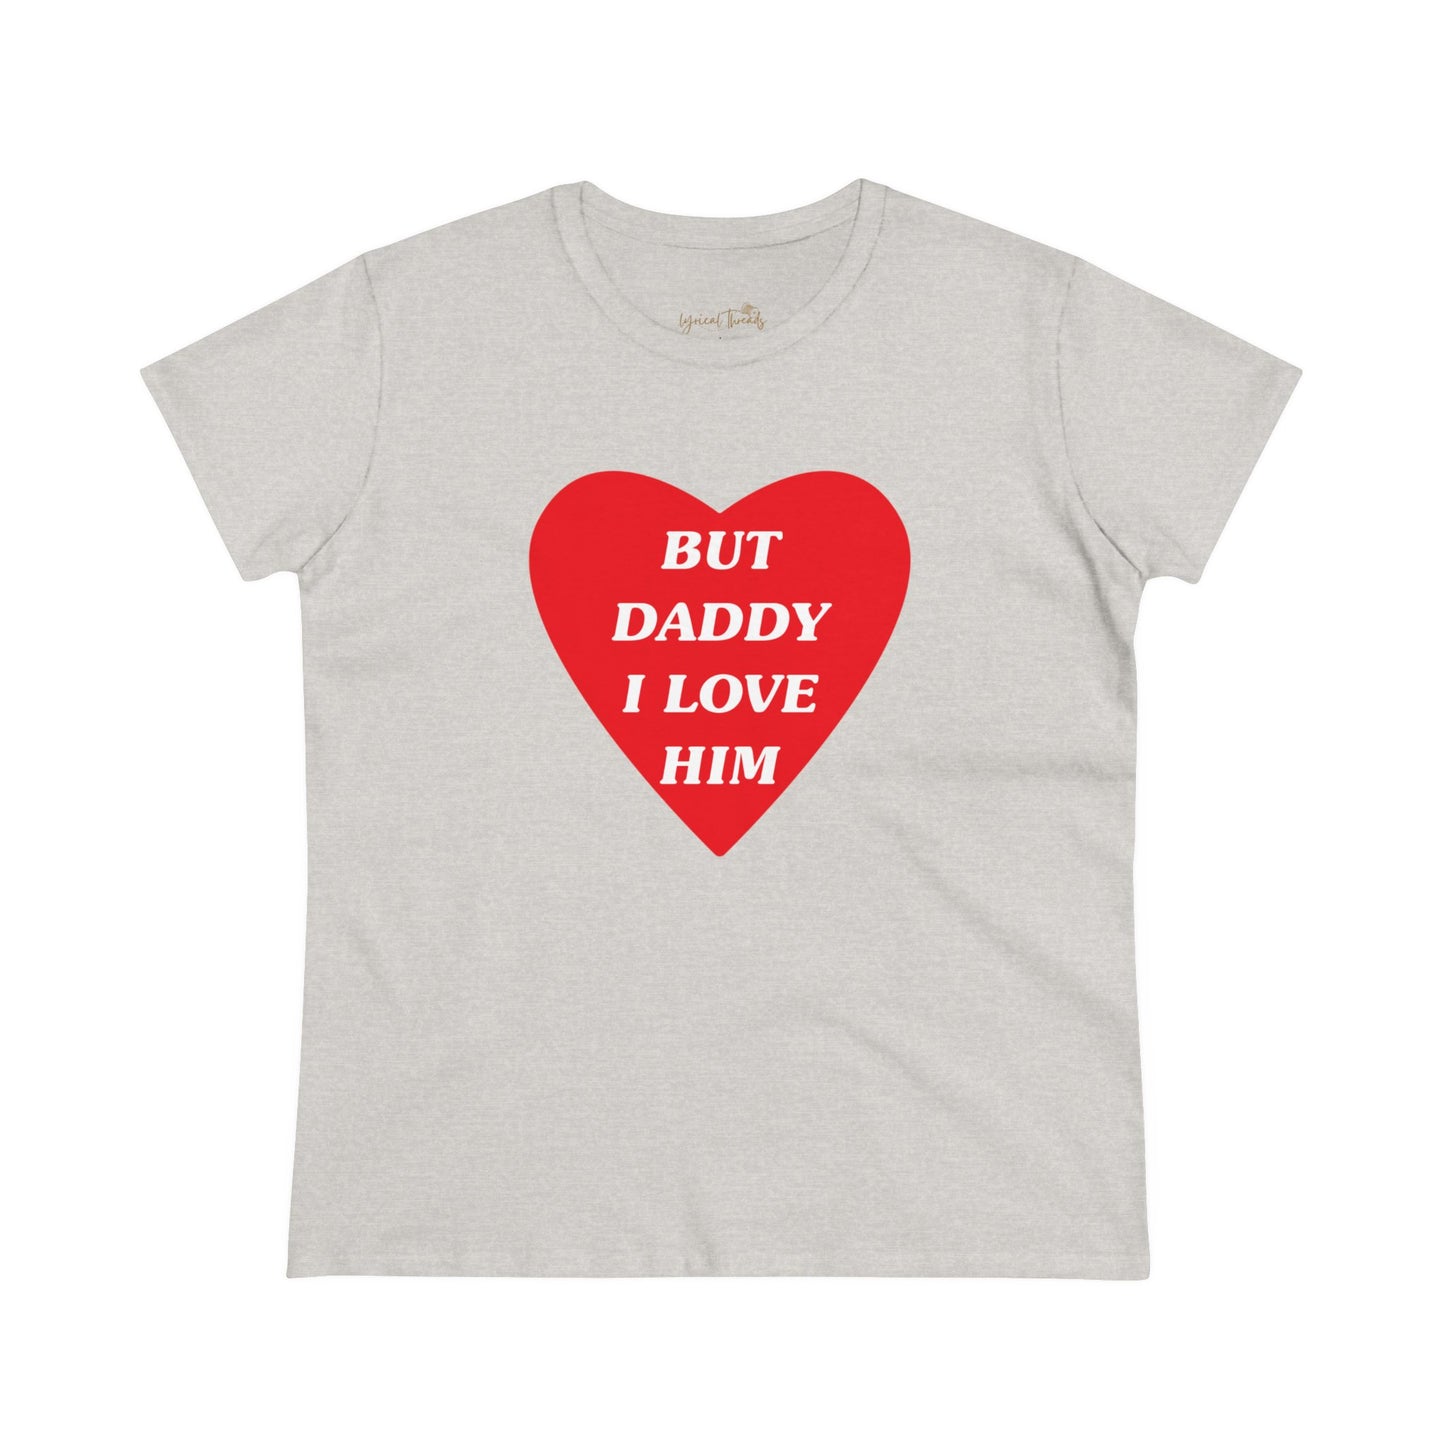 But Daddy I Love Him - Printed Tee